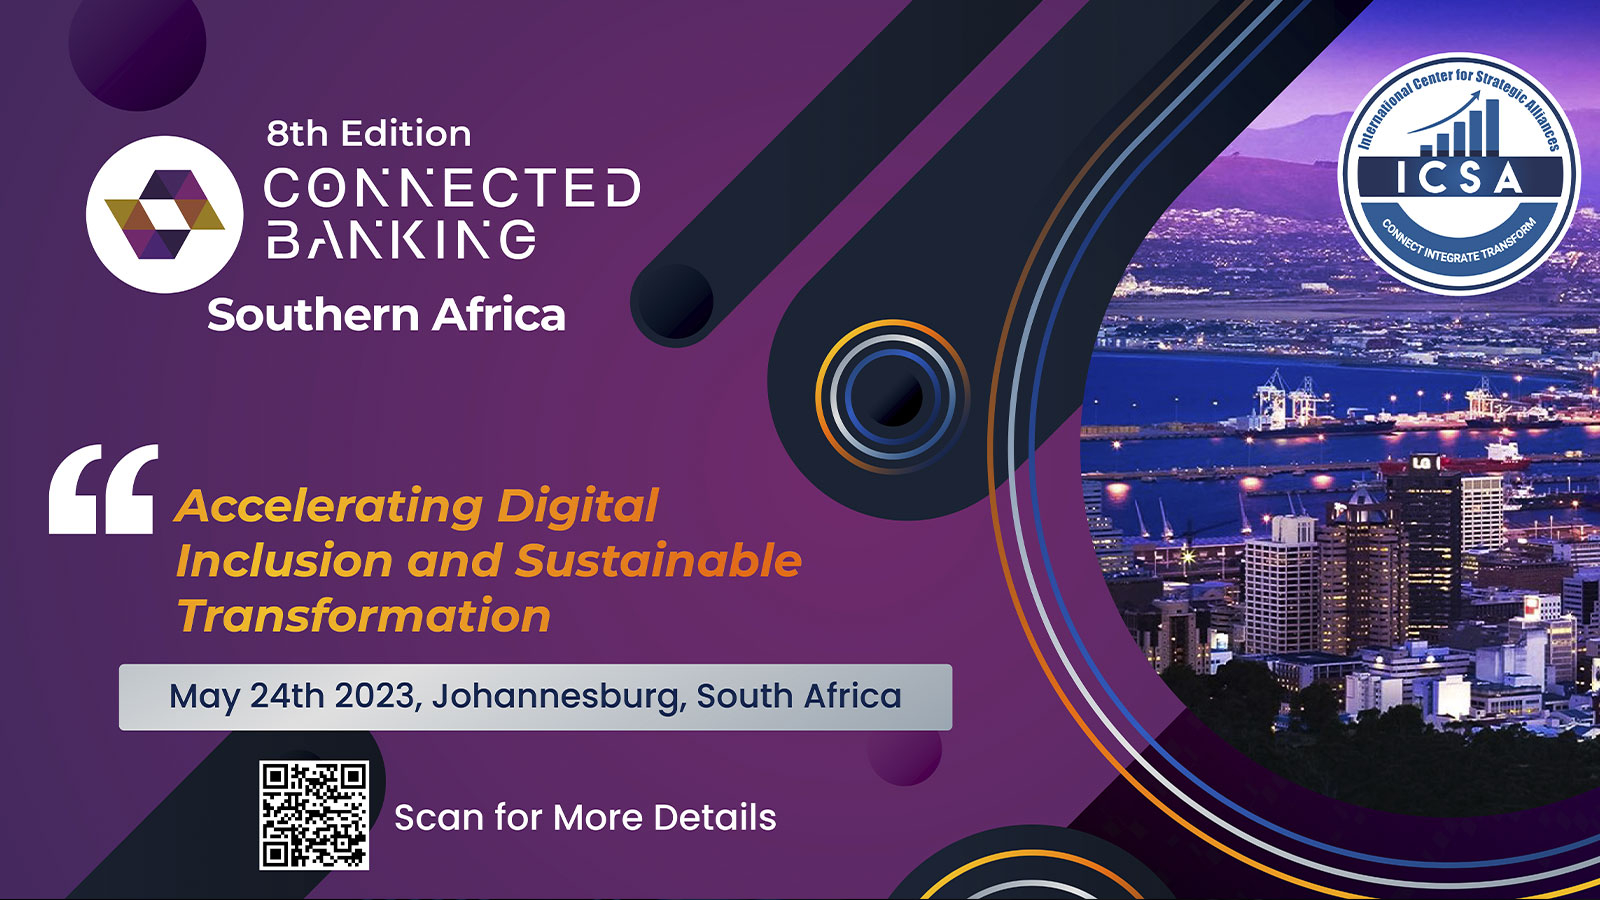 8th Edition Connected Banking Summit Southern Africa - Formerly Africa Digital Banking Summit - Innovation and Excellence Awards